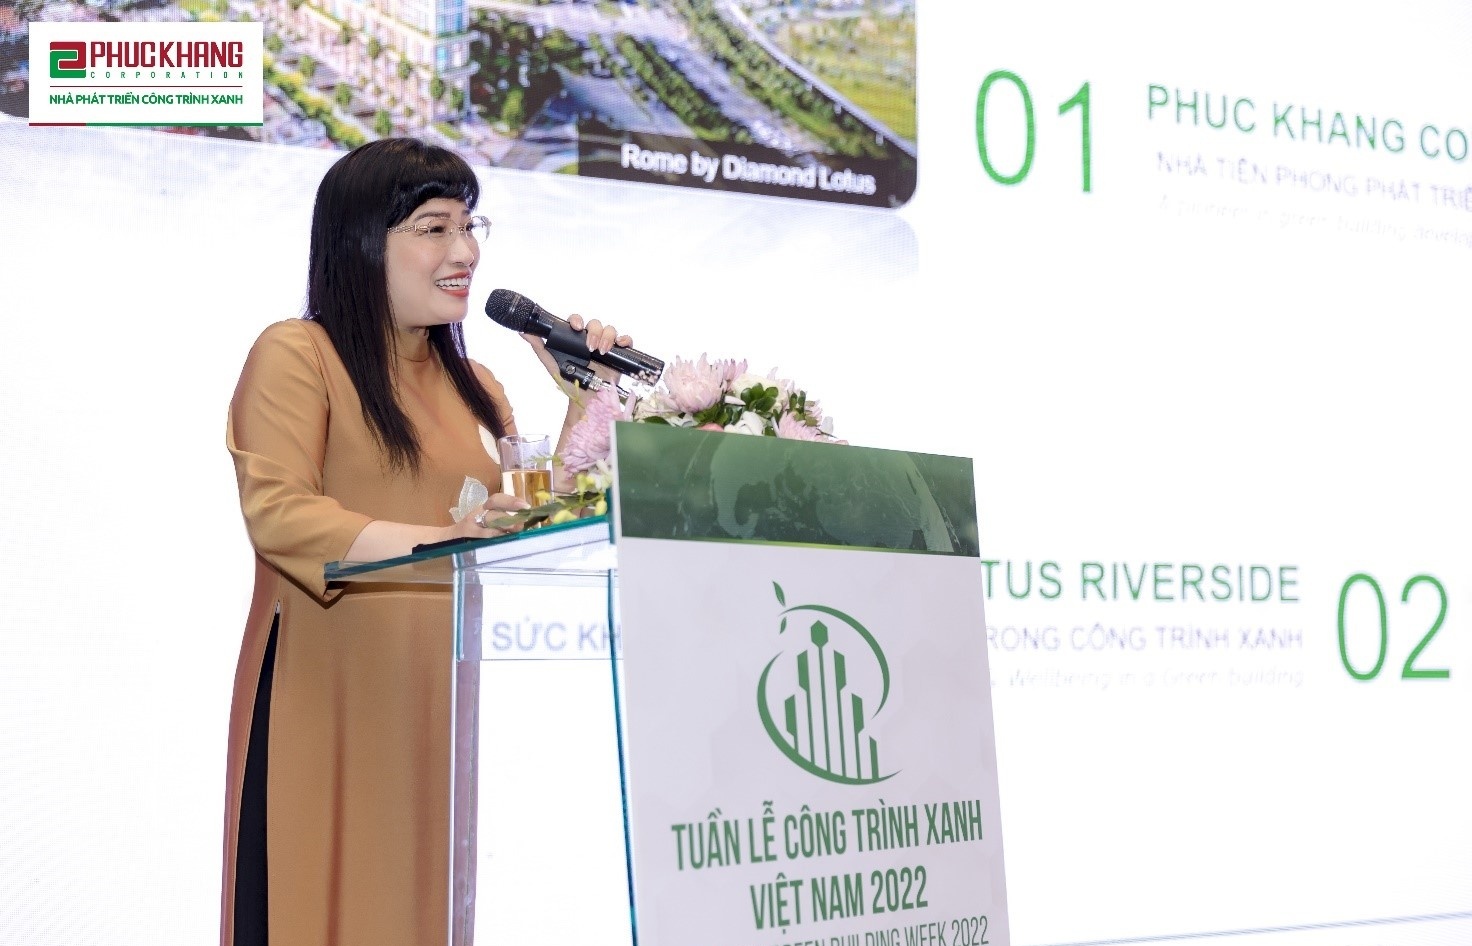 Creating value for the community by going green: Phuc Khang Corporation CEO